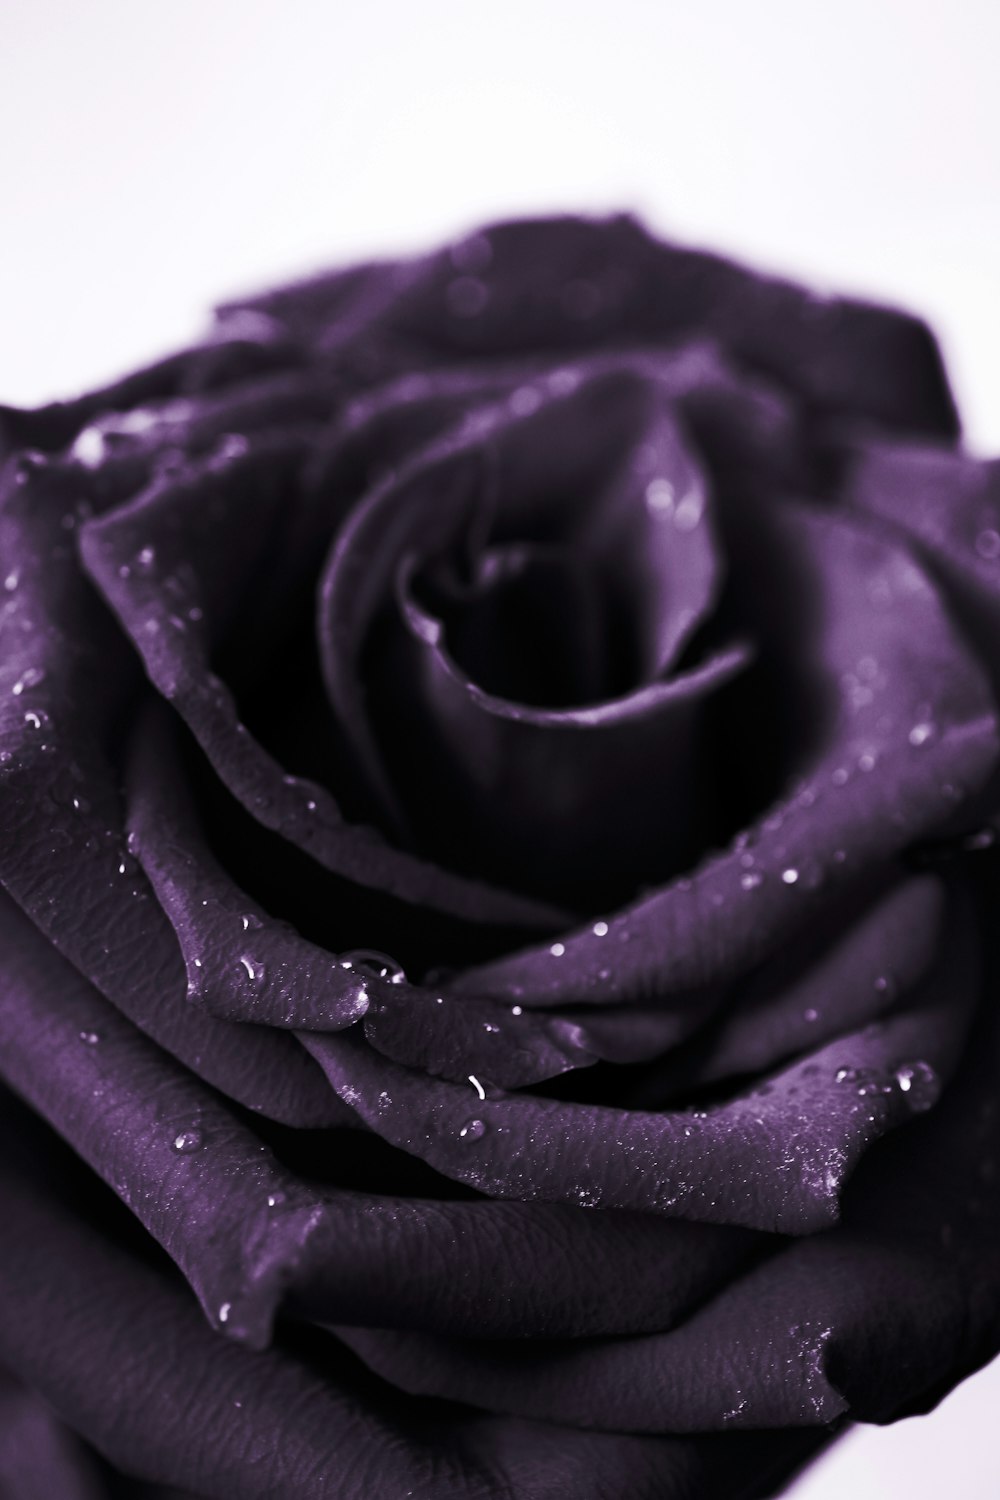 a purple rose with water droplets on it